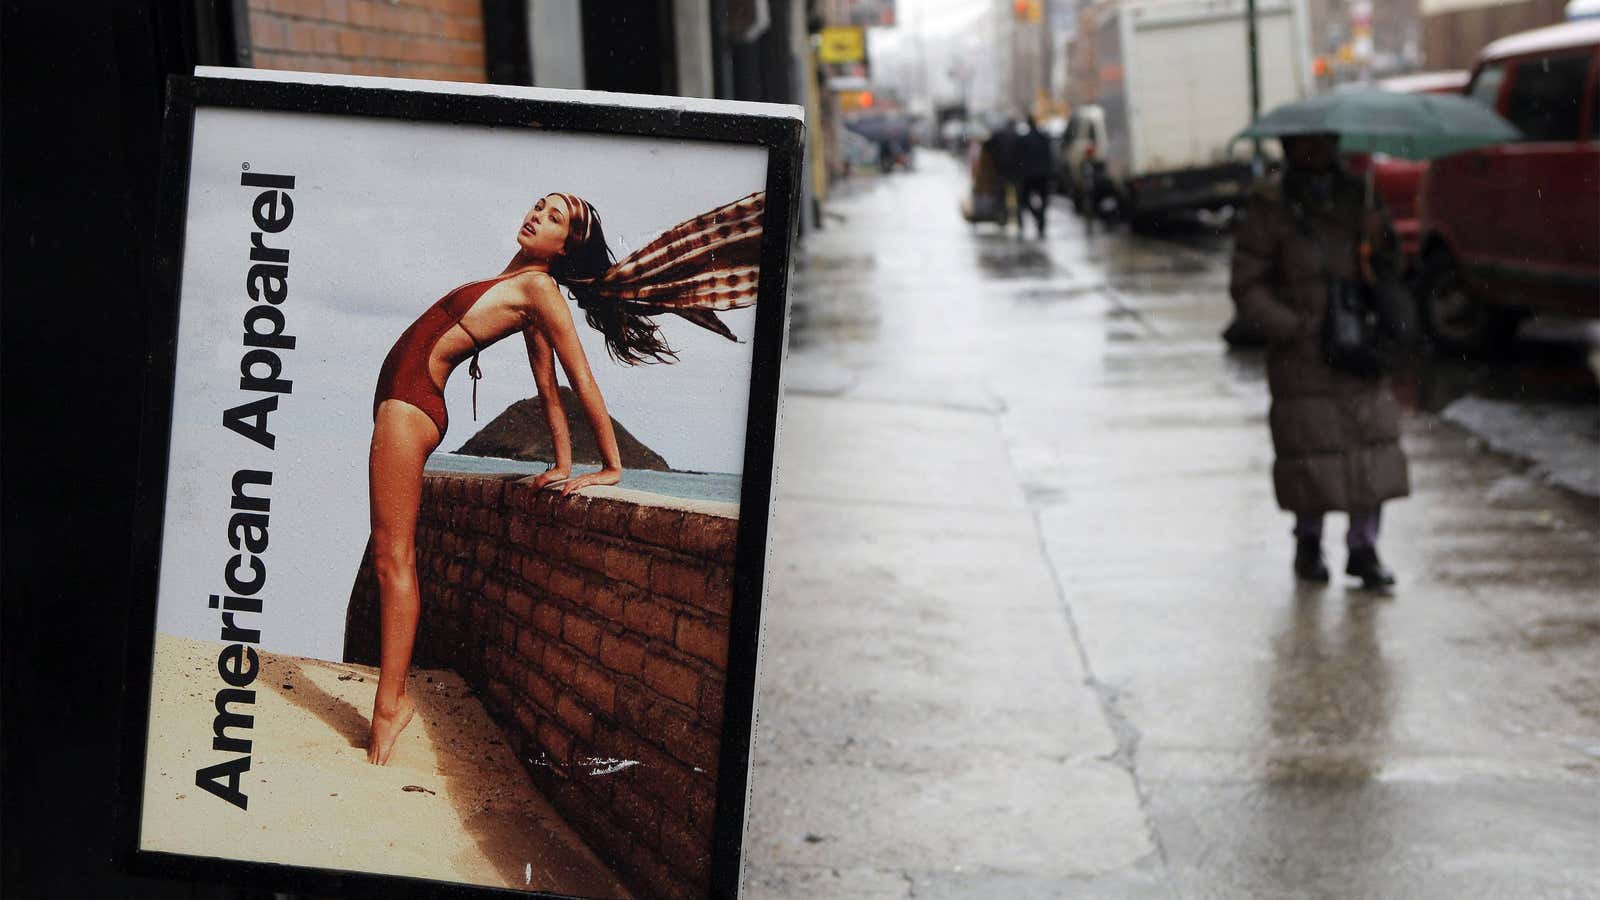 No blue skies for American Apparel.